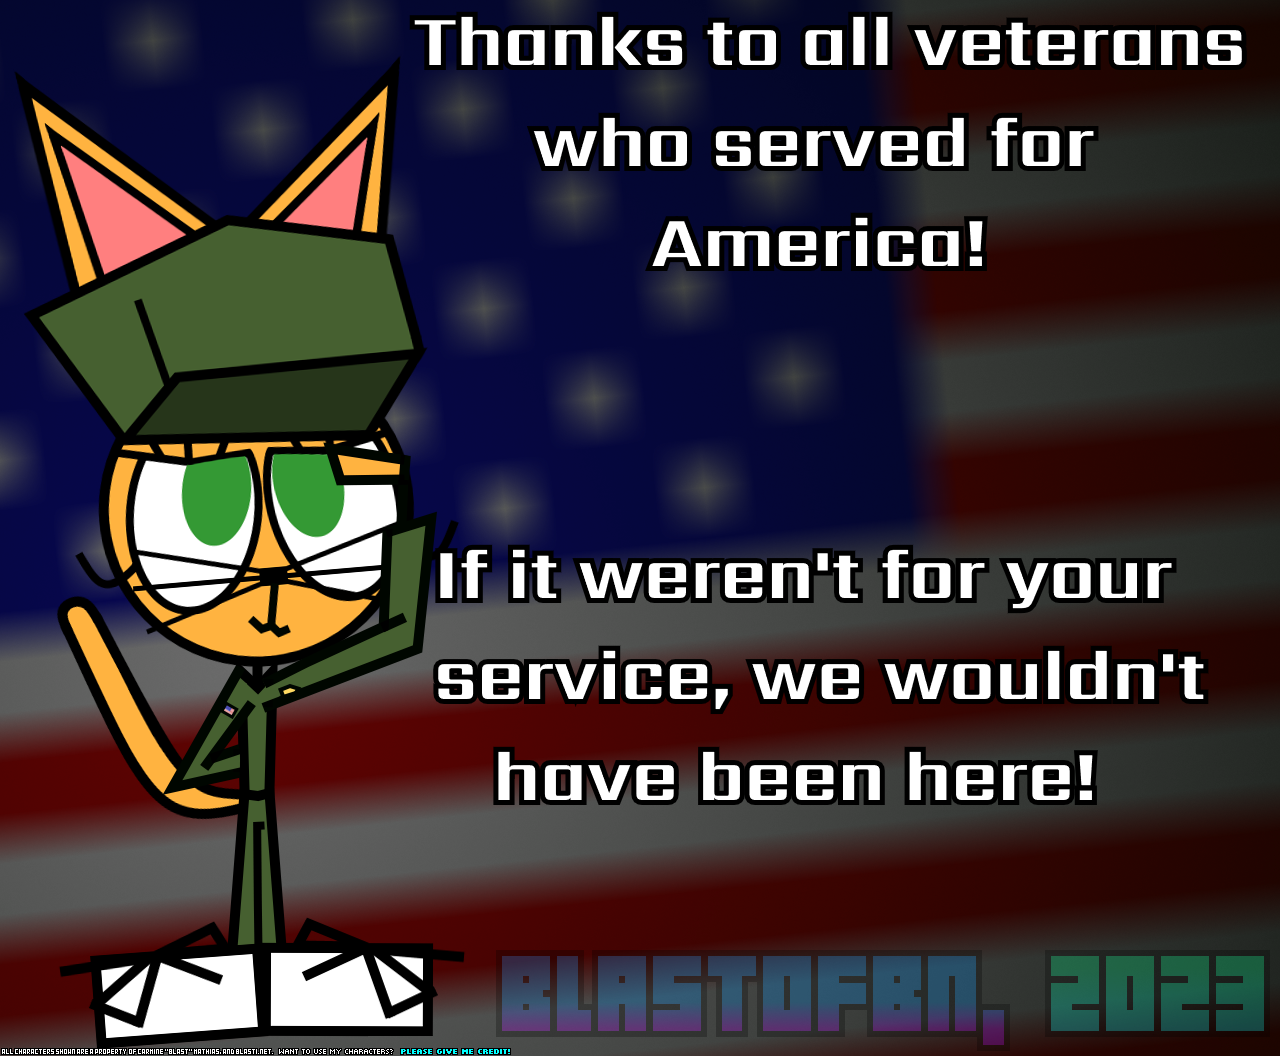 Tribute to our veterans